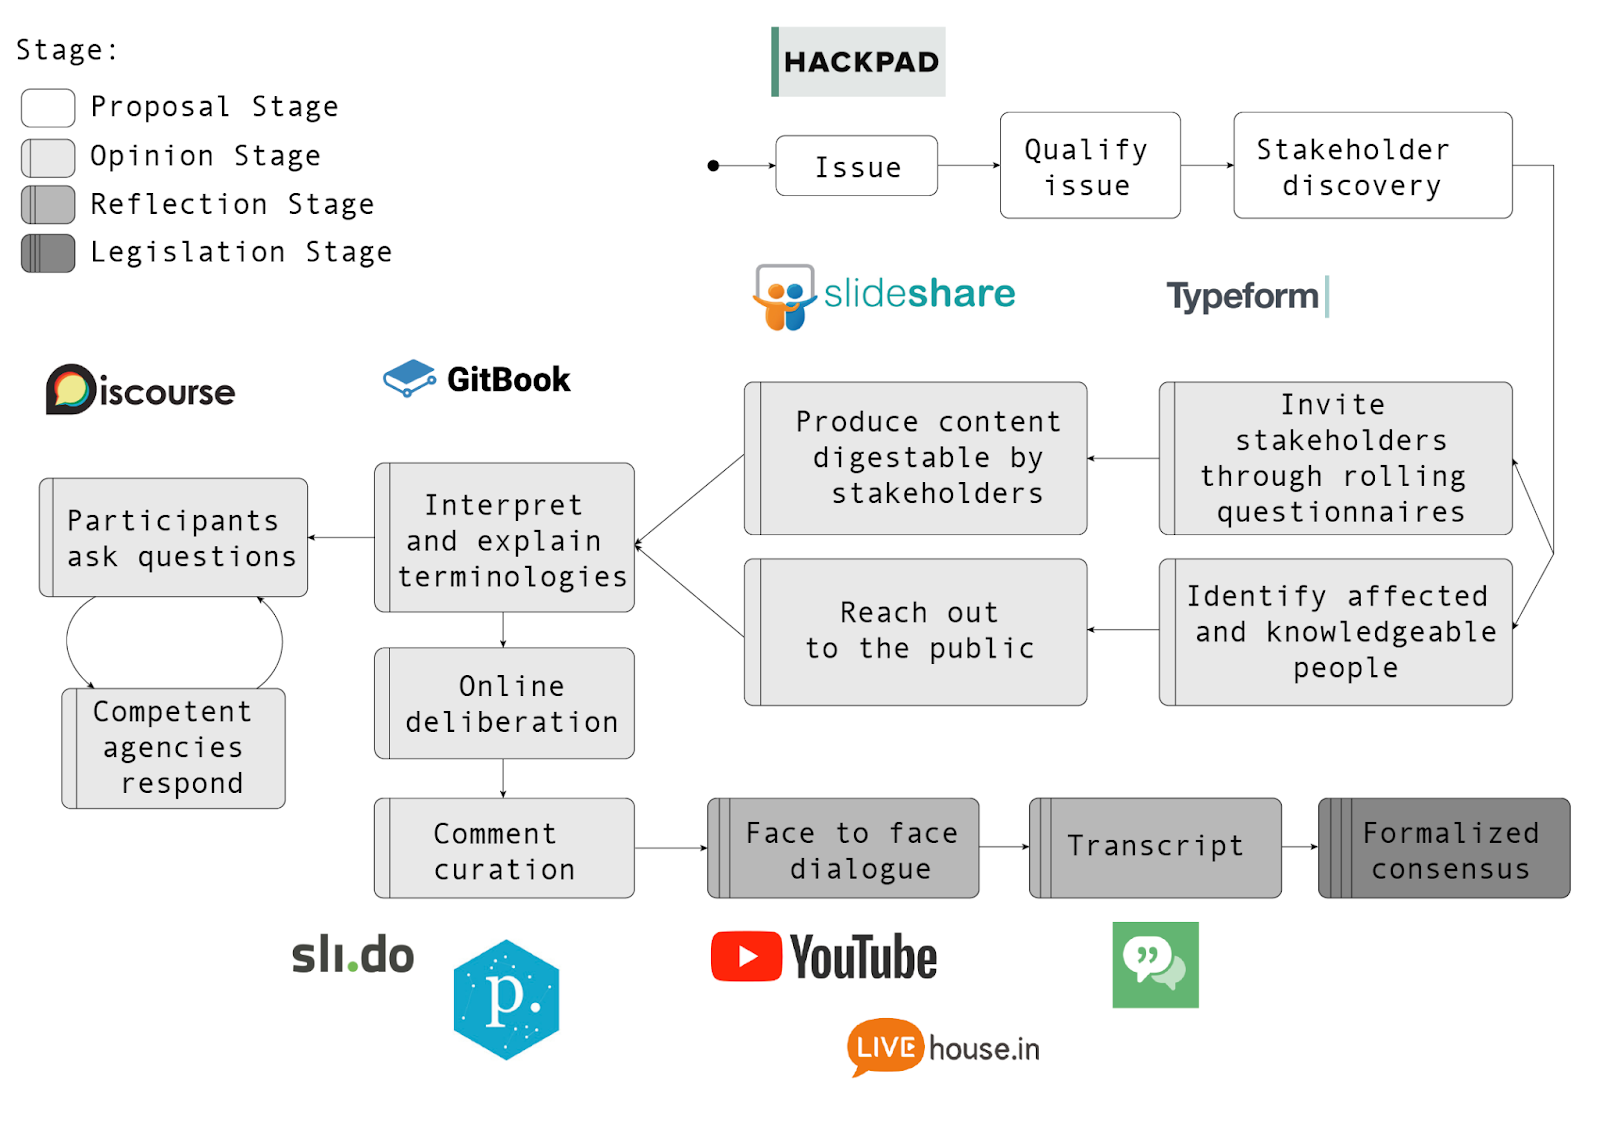 A schematic diagram of the different stages of participation used by the vTaiwan project, including the following tools: Hackpad, Discourse, Gitbook, Slideshare, Typeform, Slido, Youtube, Livehouse.in.